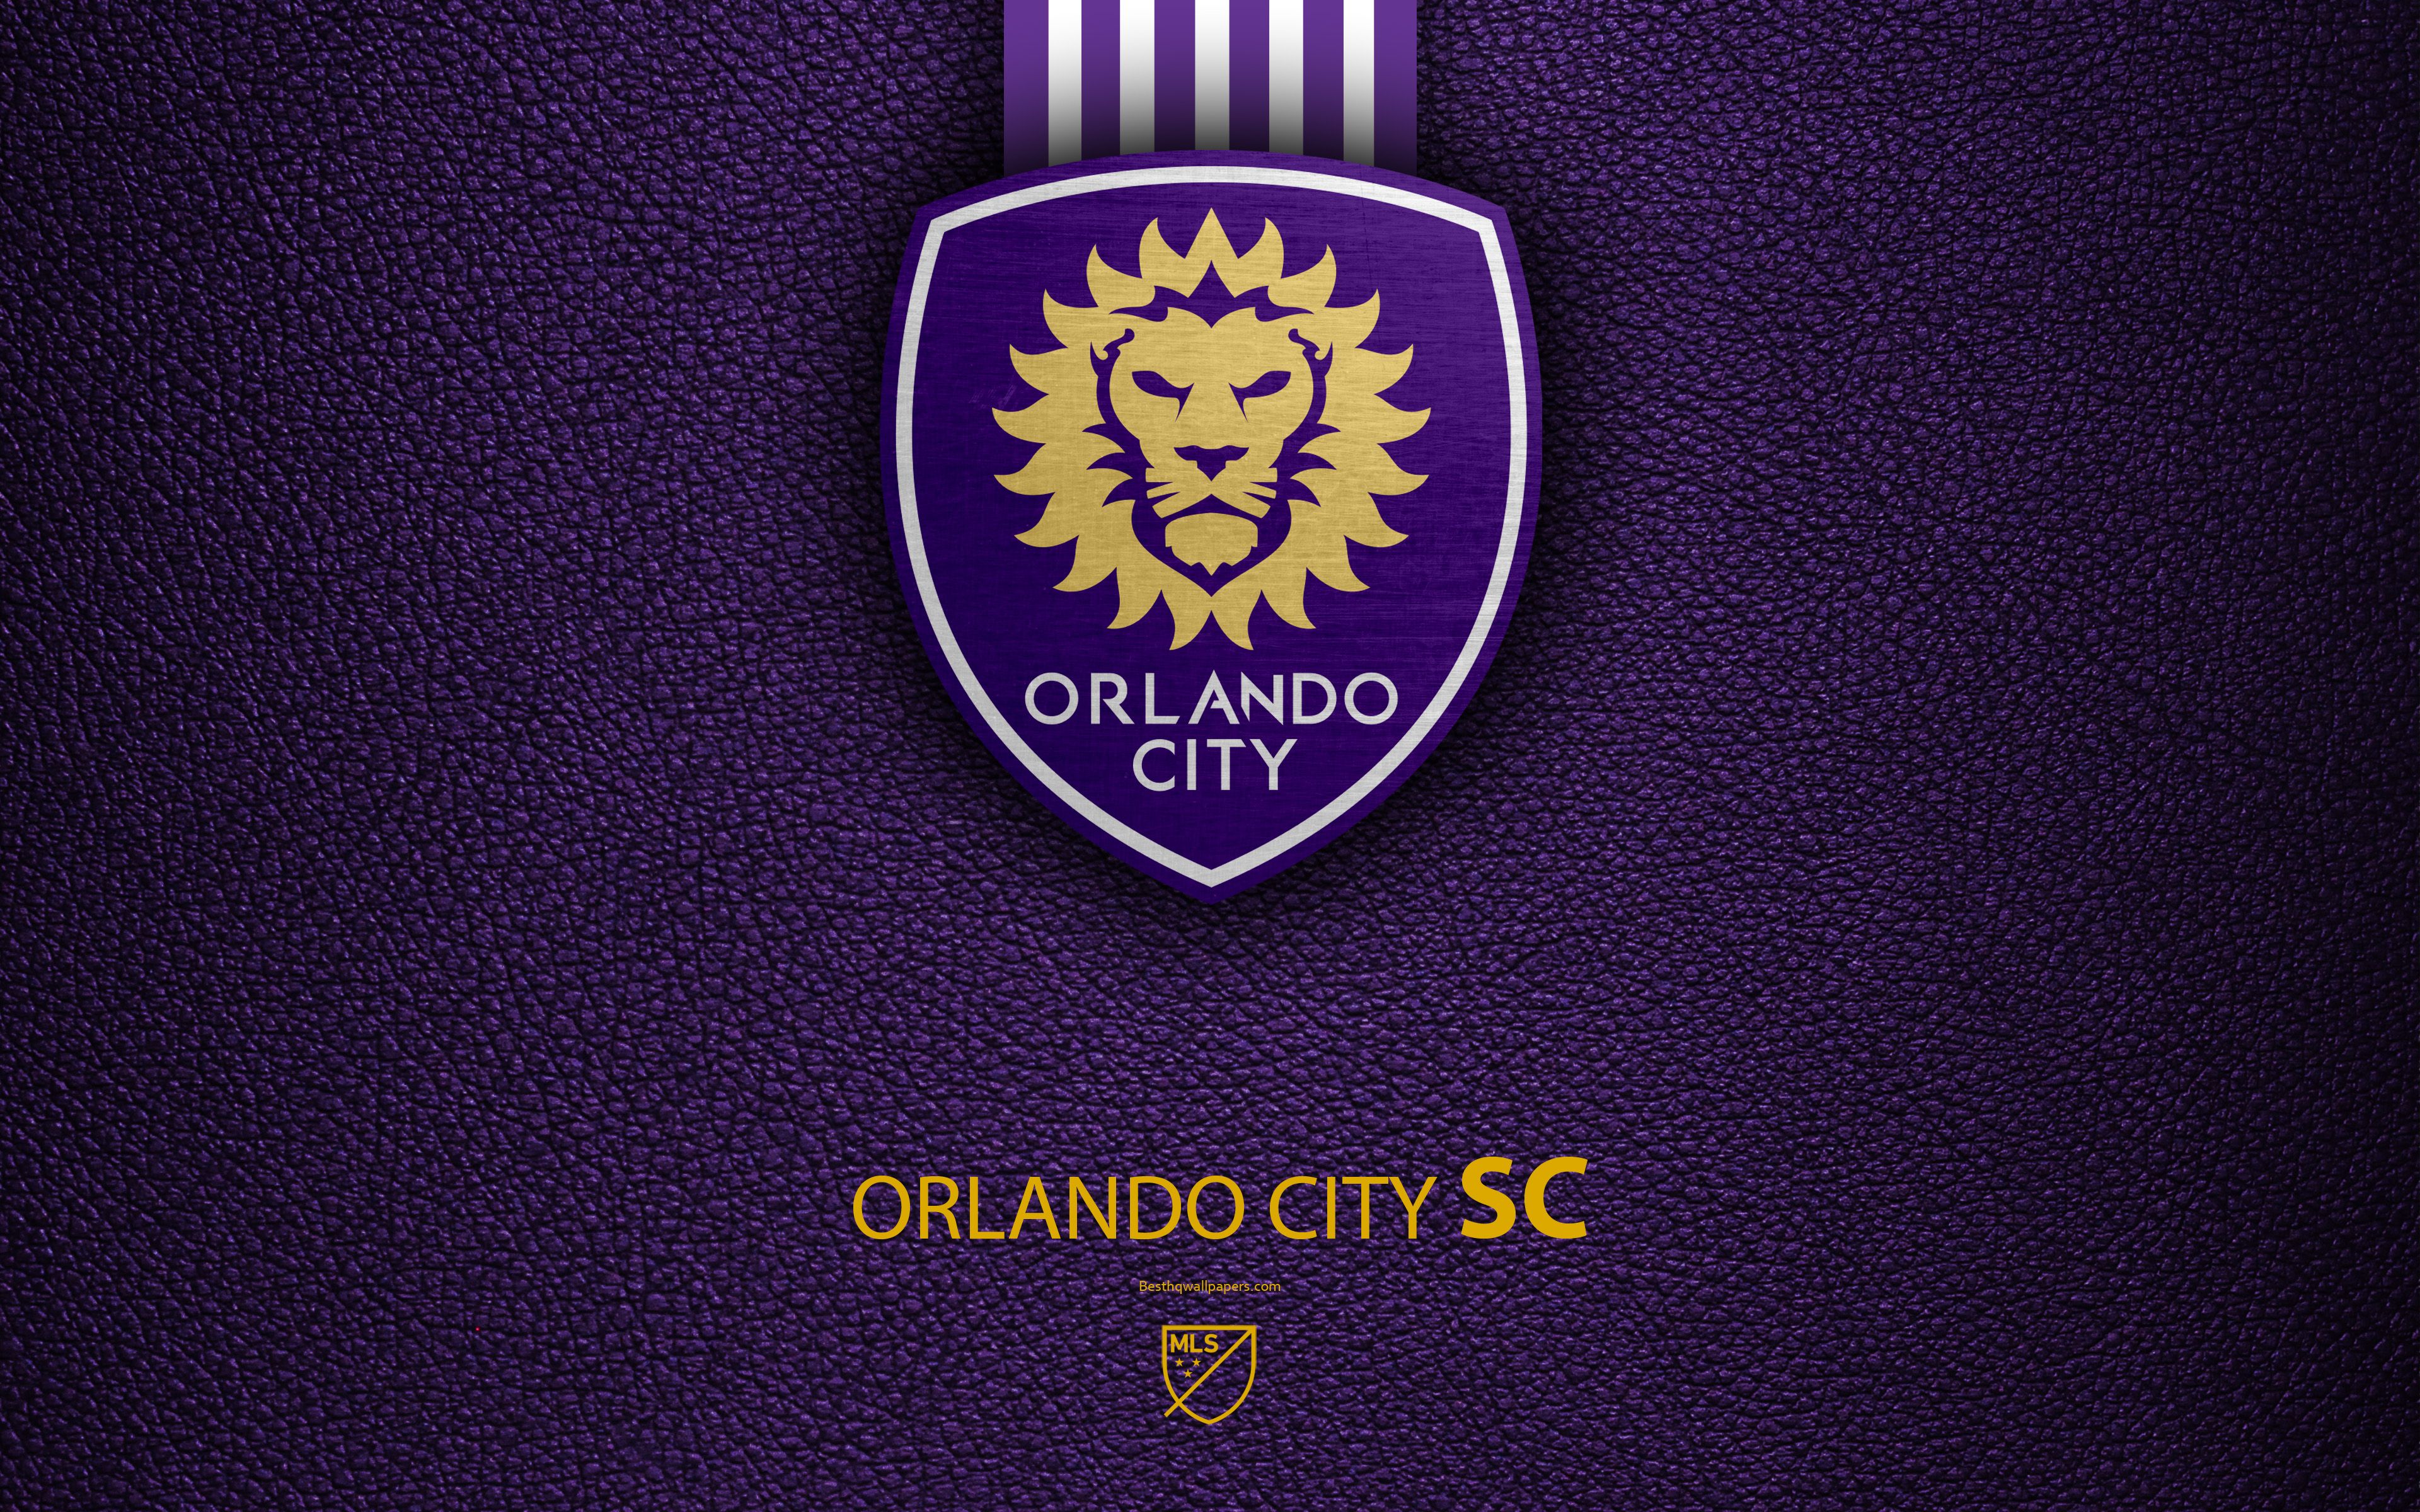 Download wallpaper Orlando City FC, 4K, American soccer club, MLS, leather texture, logo, emblem, Major League Soccer, Orlando, Florida, USA, football, MLS logo for desktop with resolution 3840x2400. High Quality HD picture